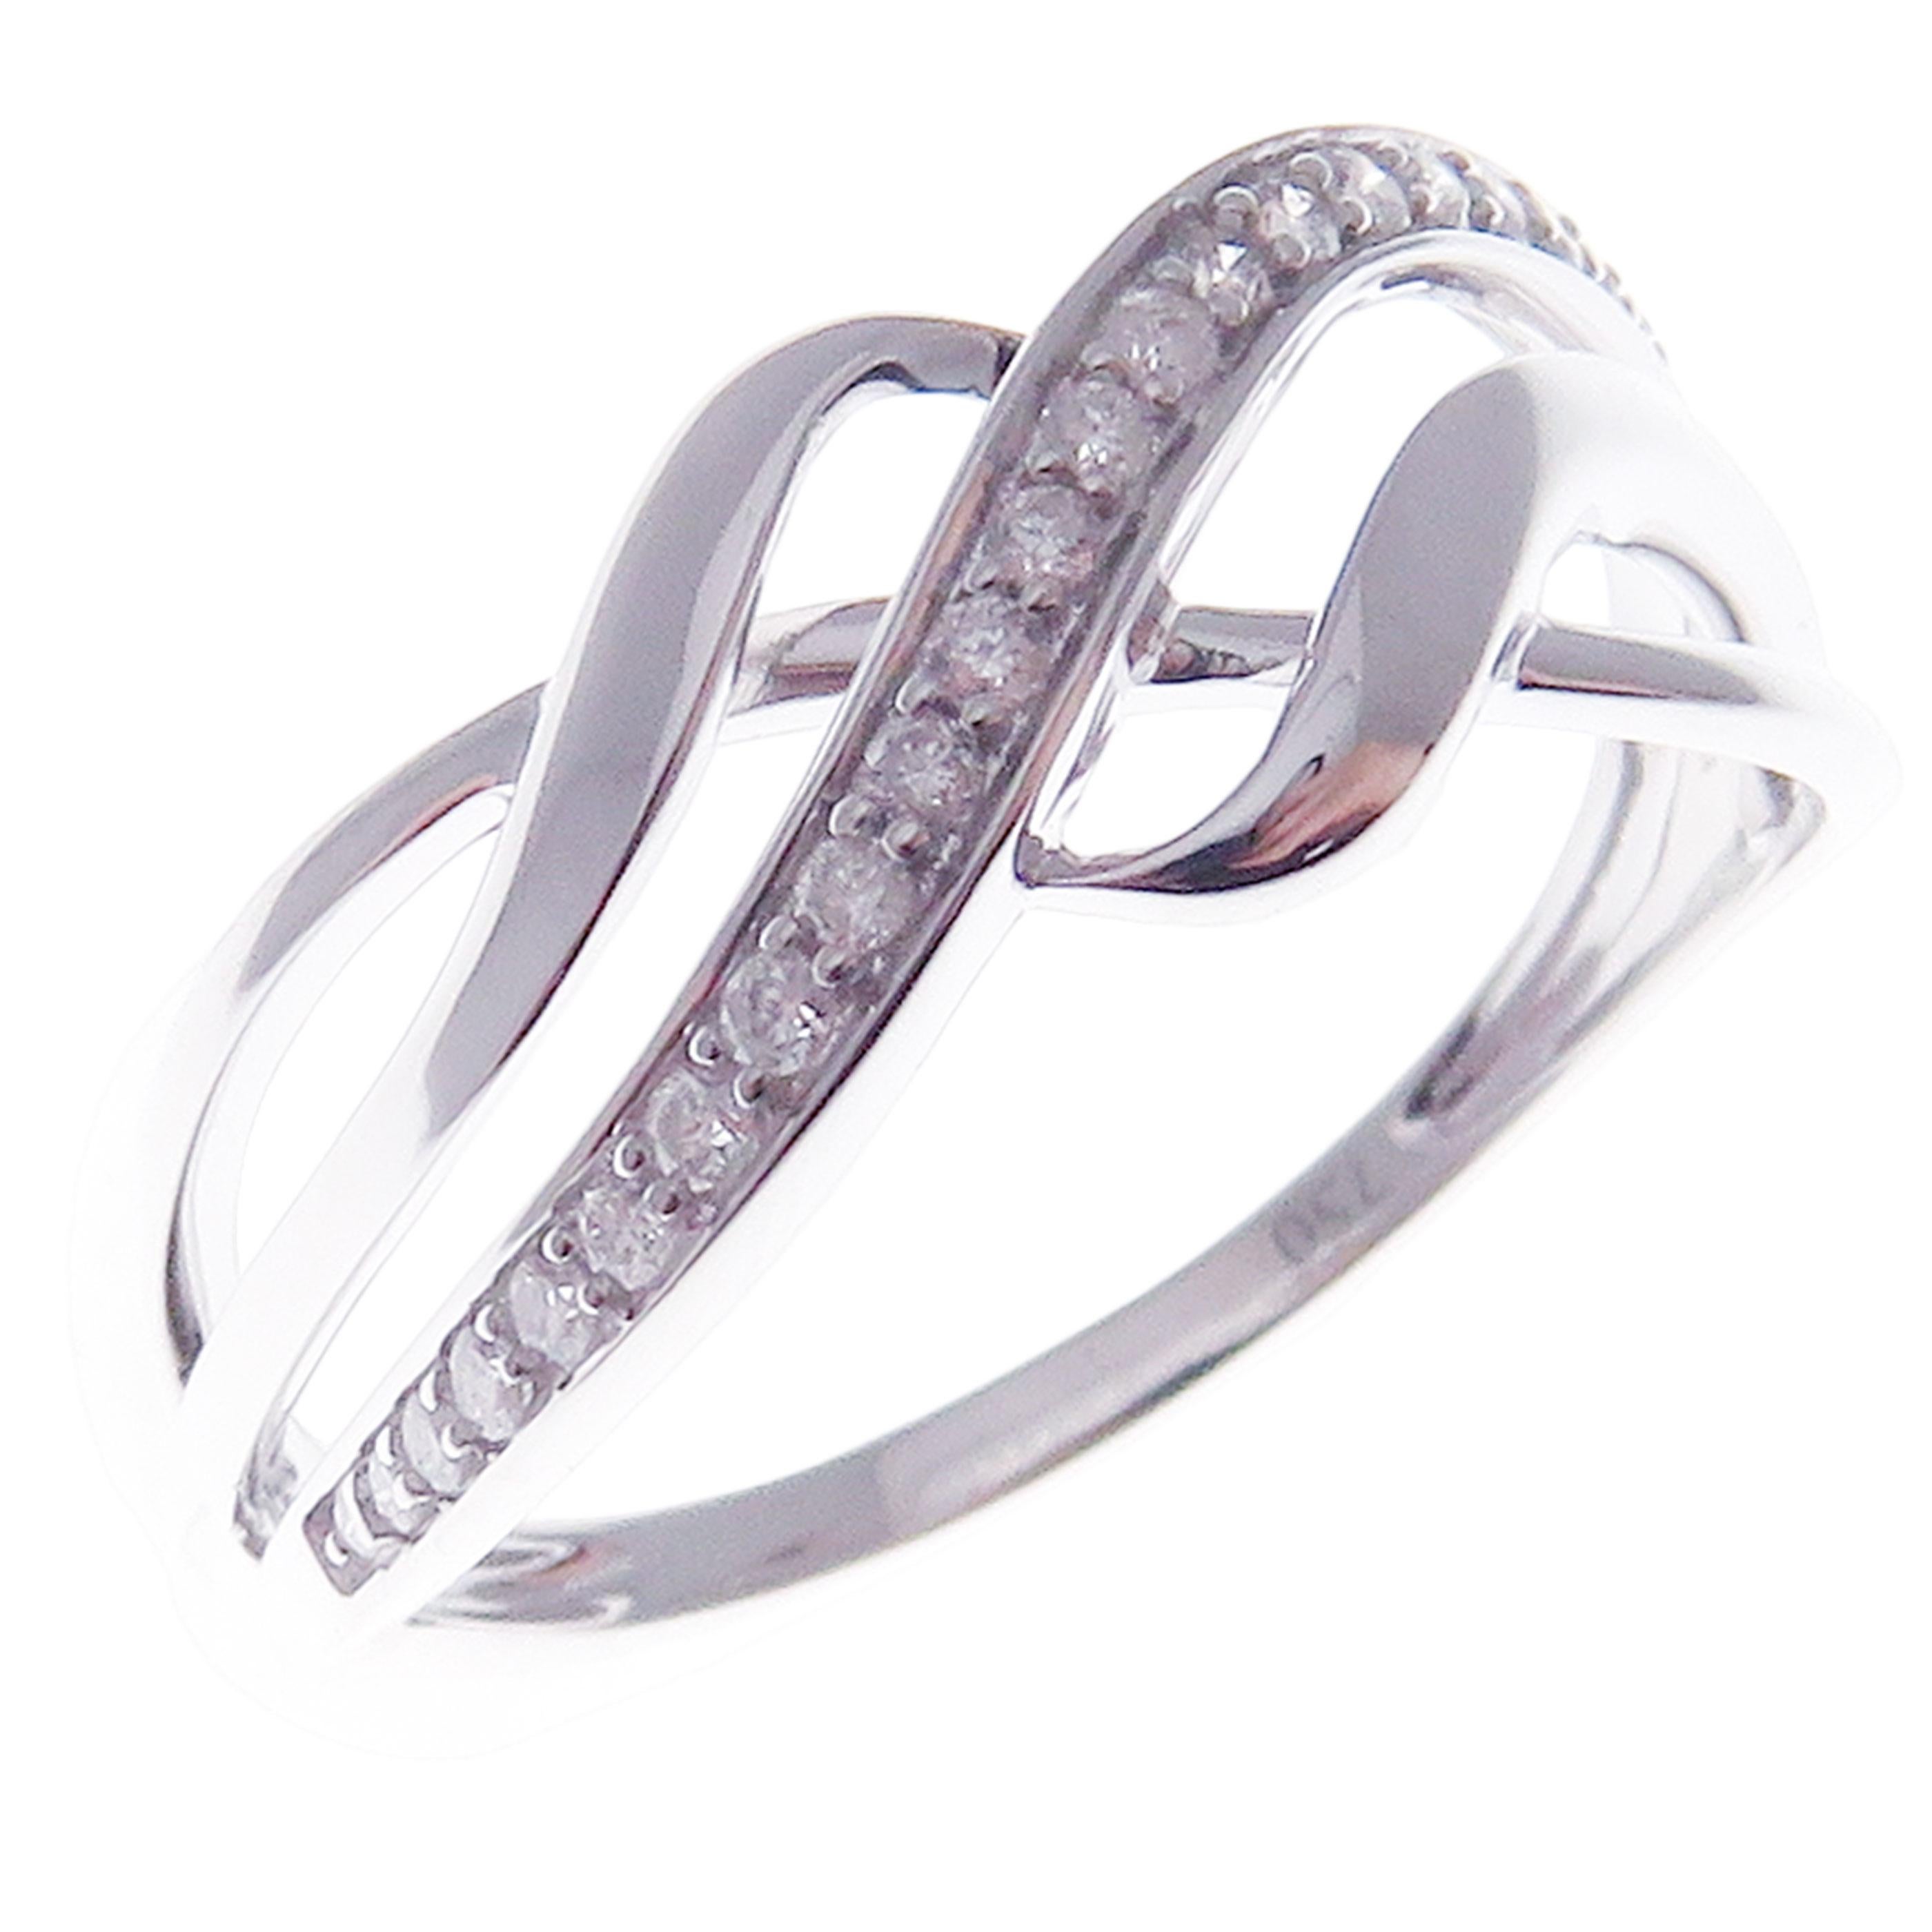 This trendy multi-layer wavy cross over band is crafted in 18-karat white gold, featuring 23 round white diamonds totaling of 0.17 carats.
Approximate total weight 2.56 grams.
Standard Ring size 7
SI-G Quality natural white diamonds.